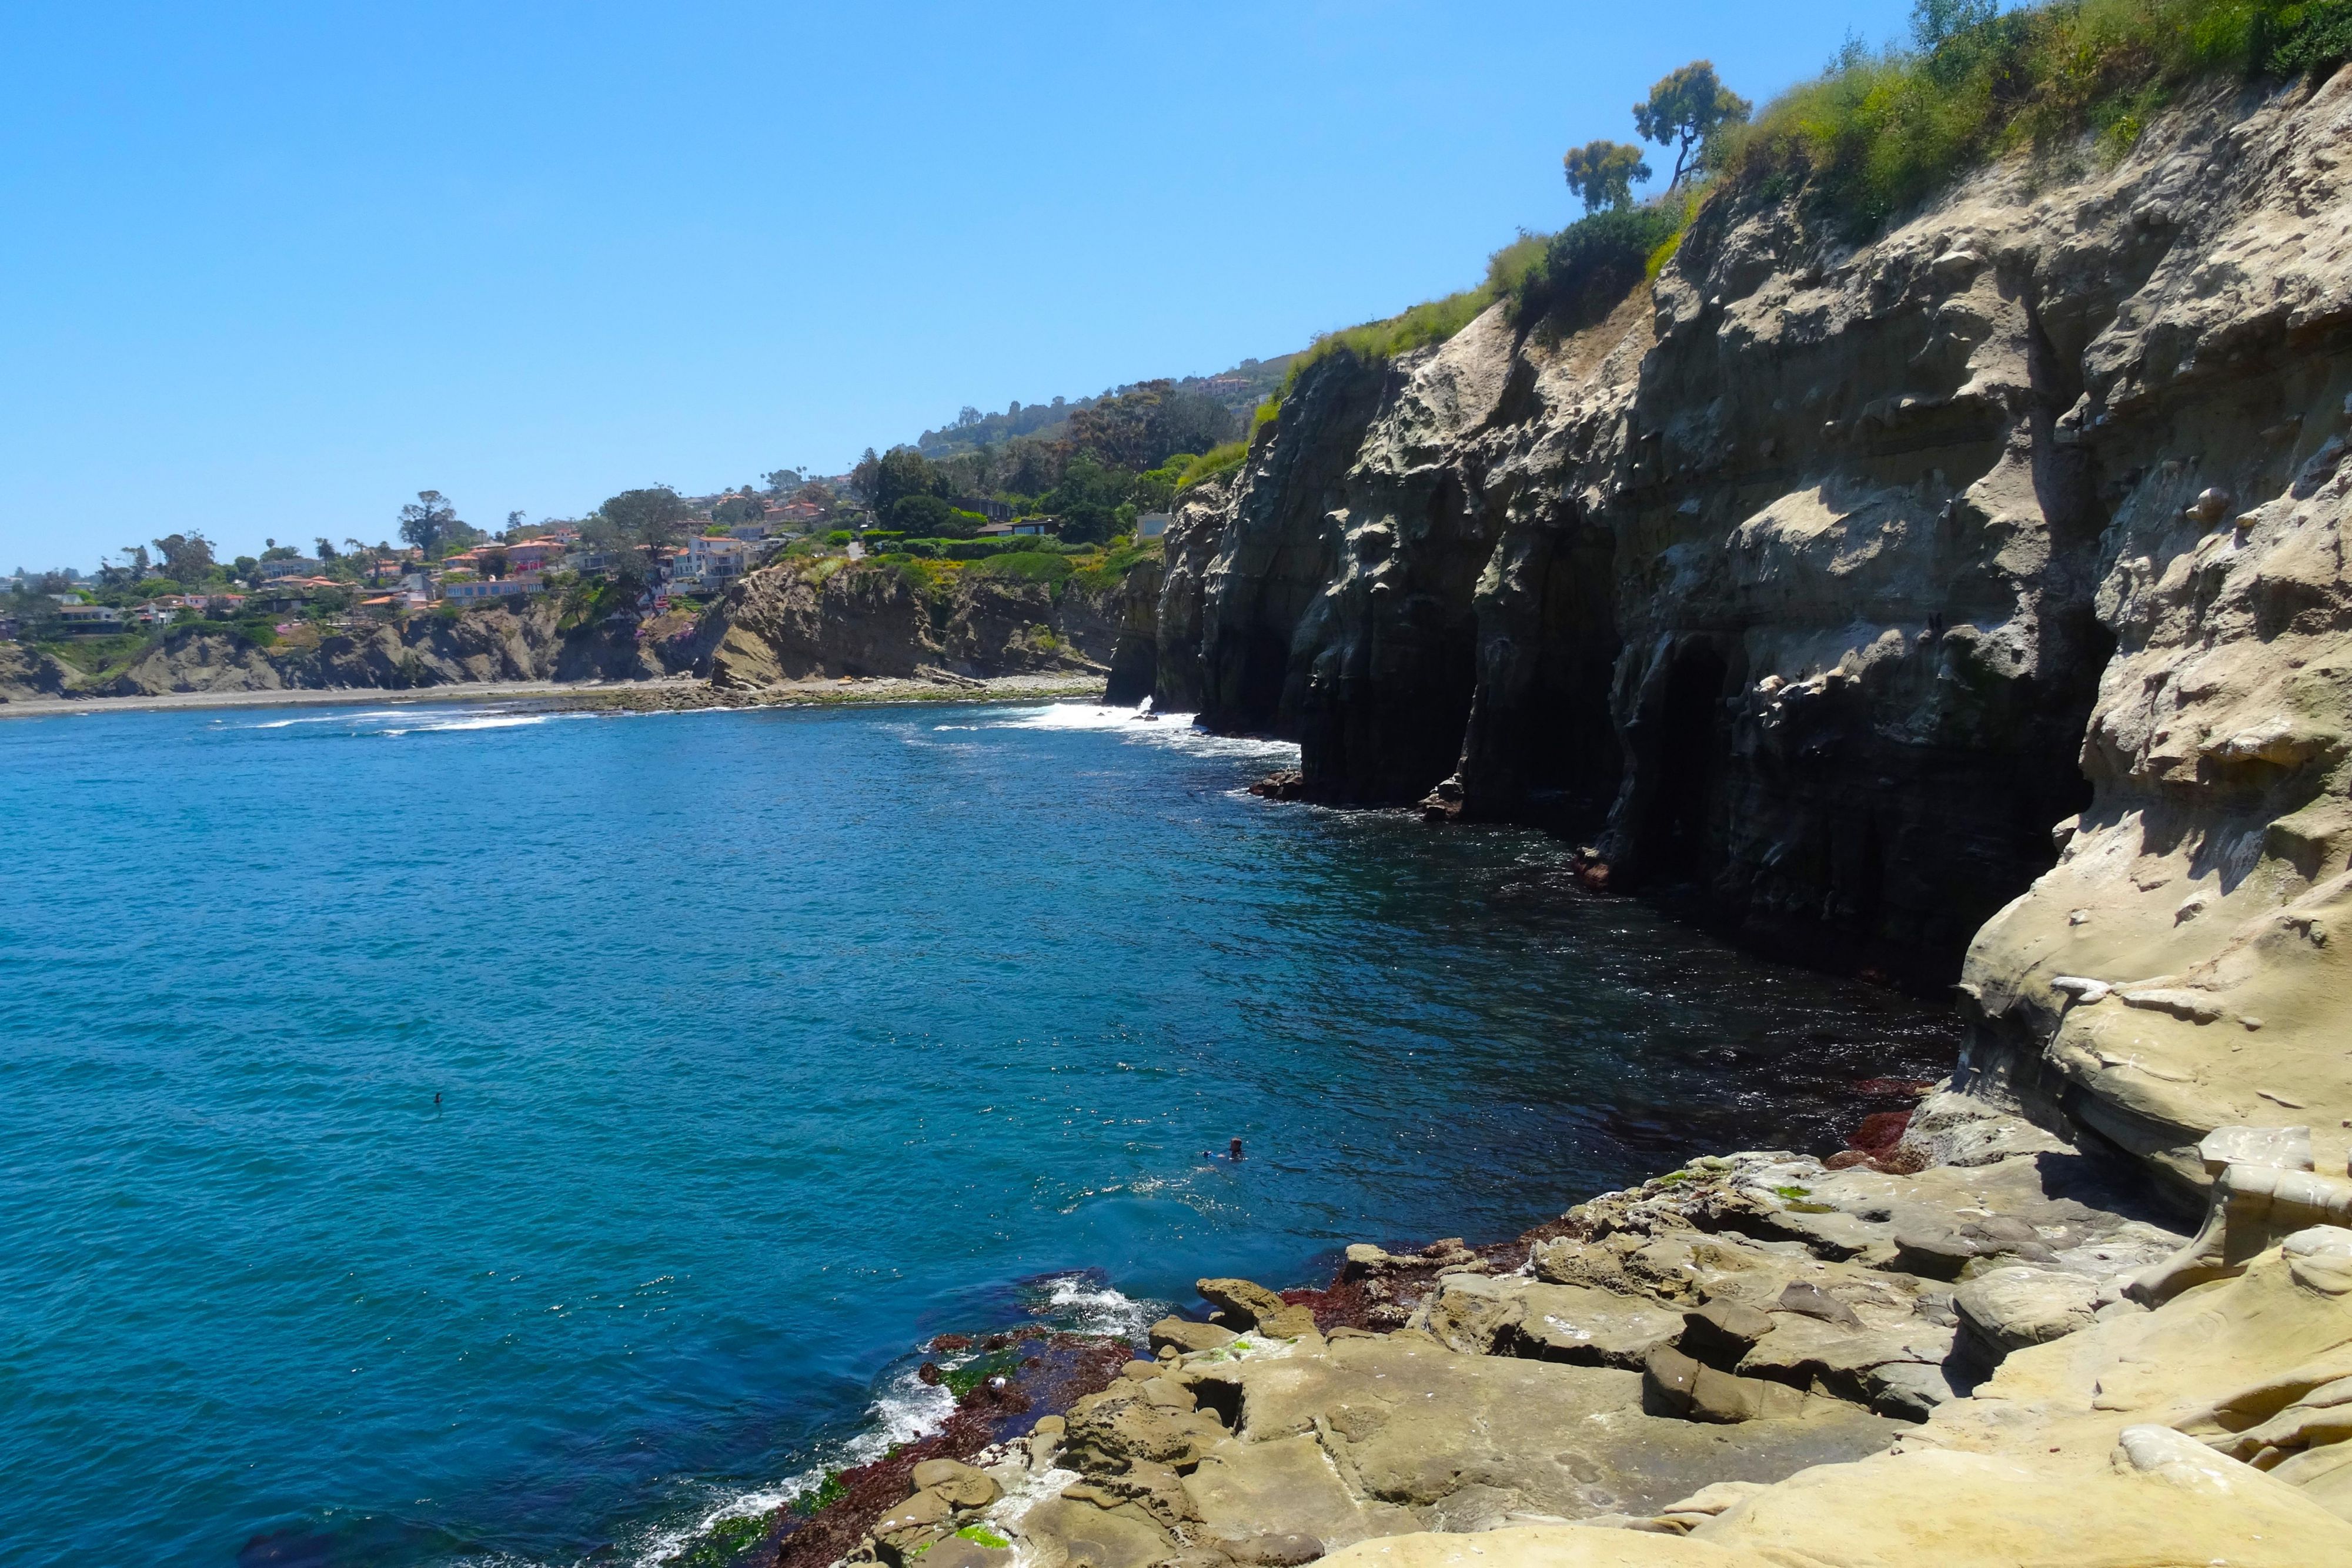 Fabulous La Jolla Cove only 15 minutes from Crowne Plaza San Diego